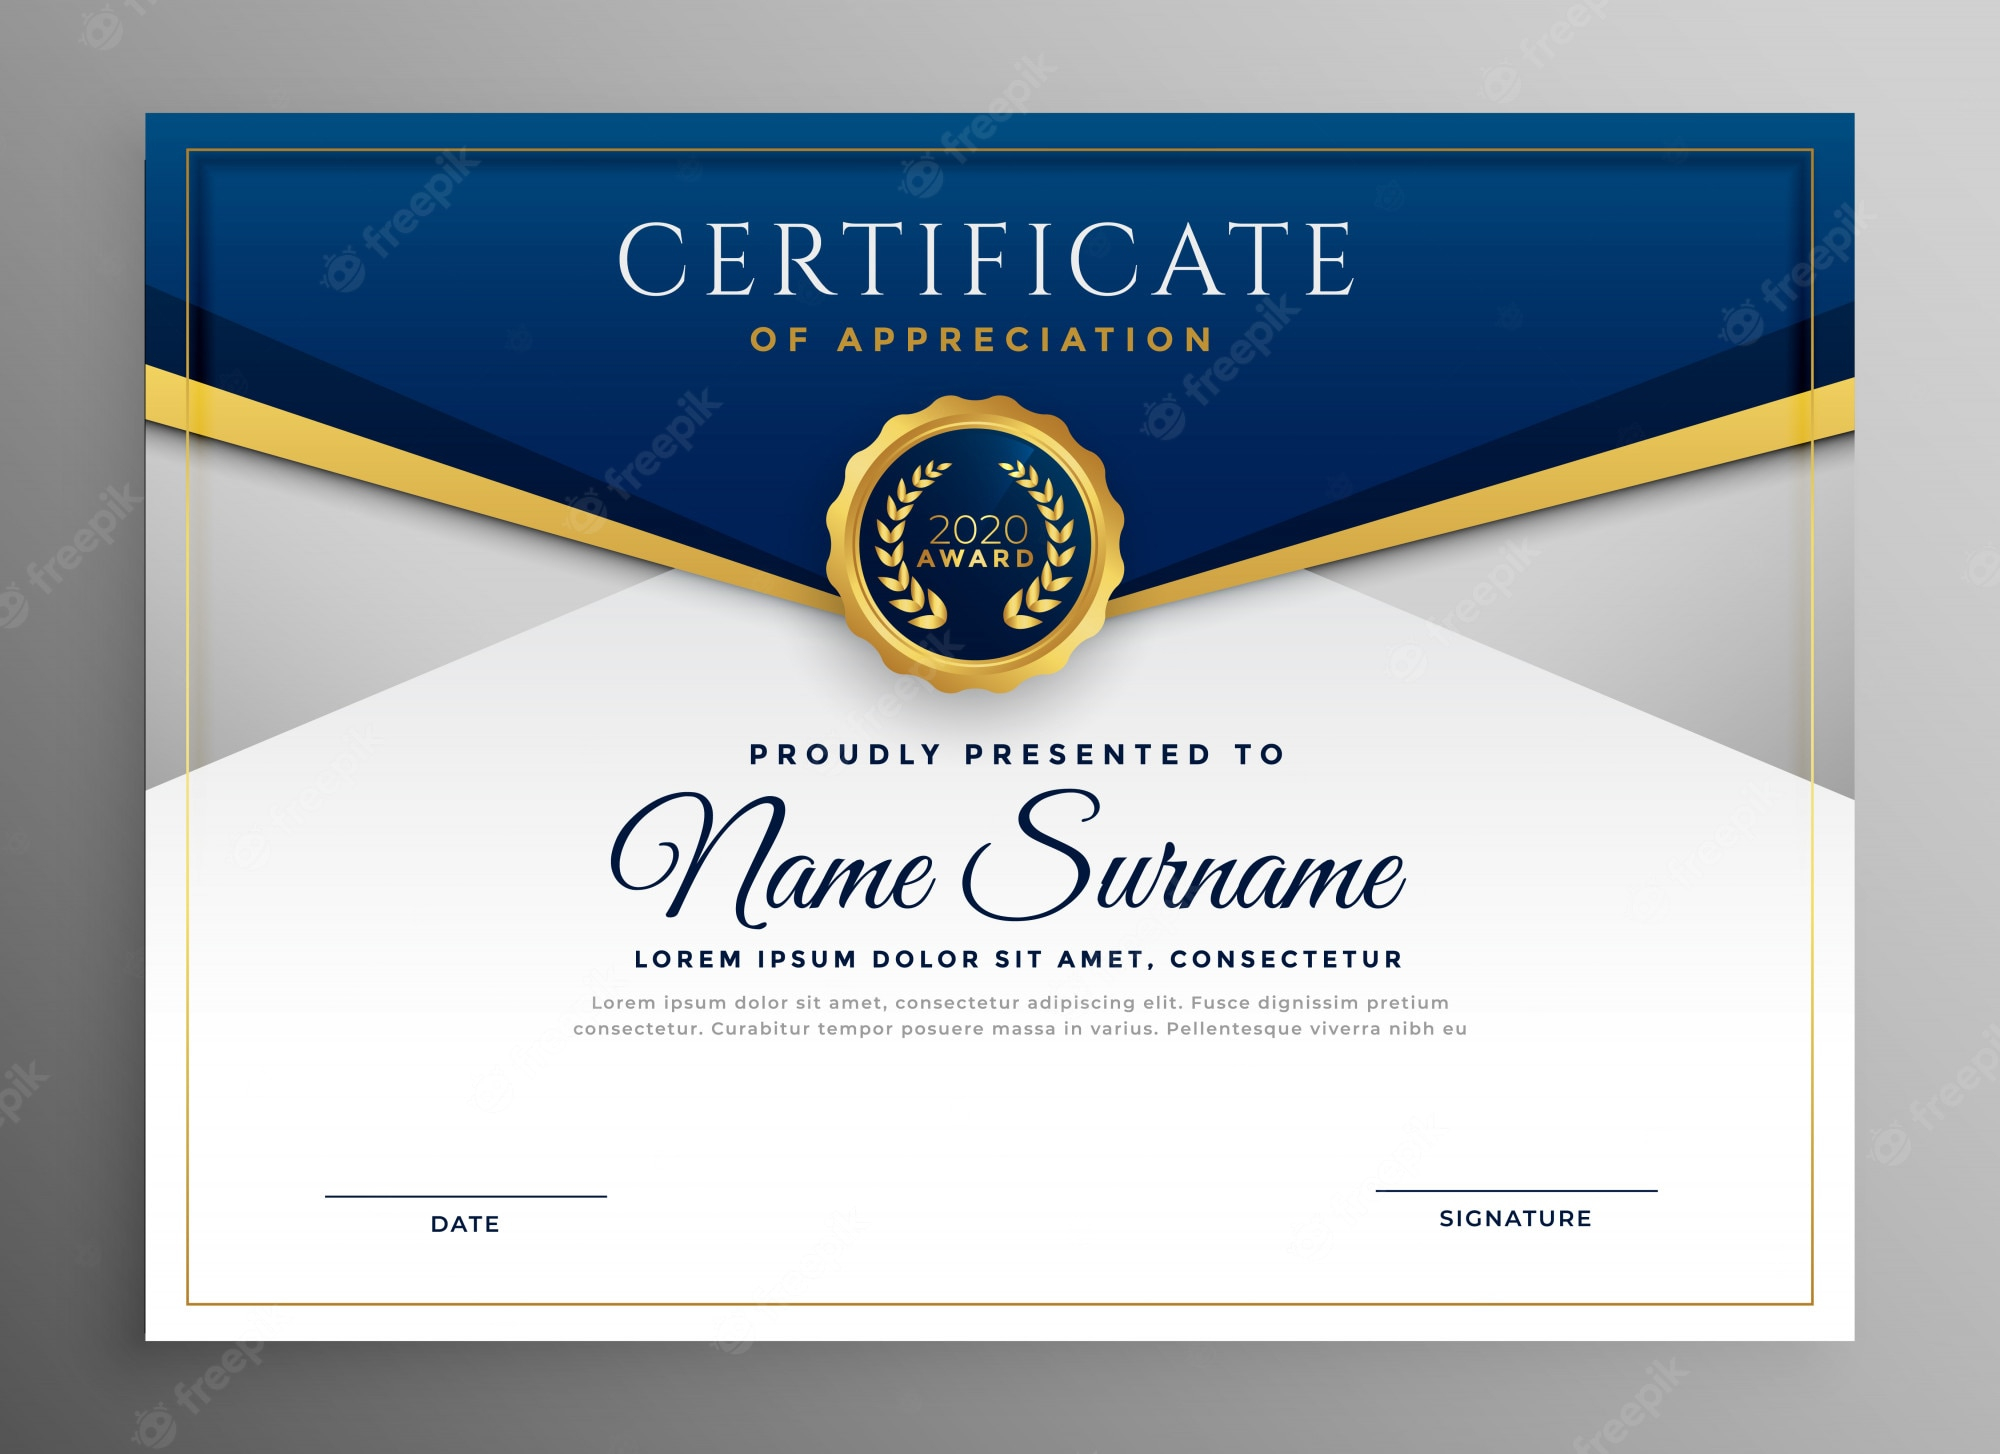 Certificate Images - Free Download on Freepik Pertaining To Beautiful Certificate Templates